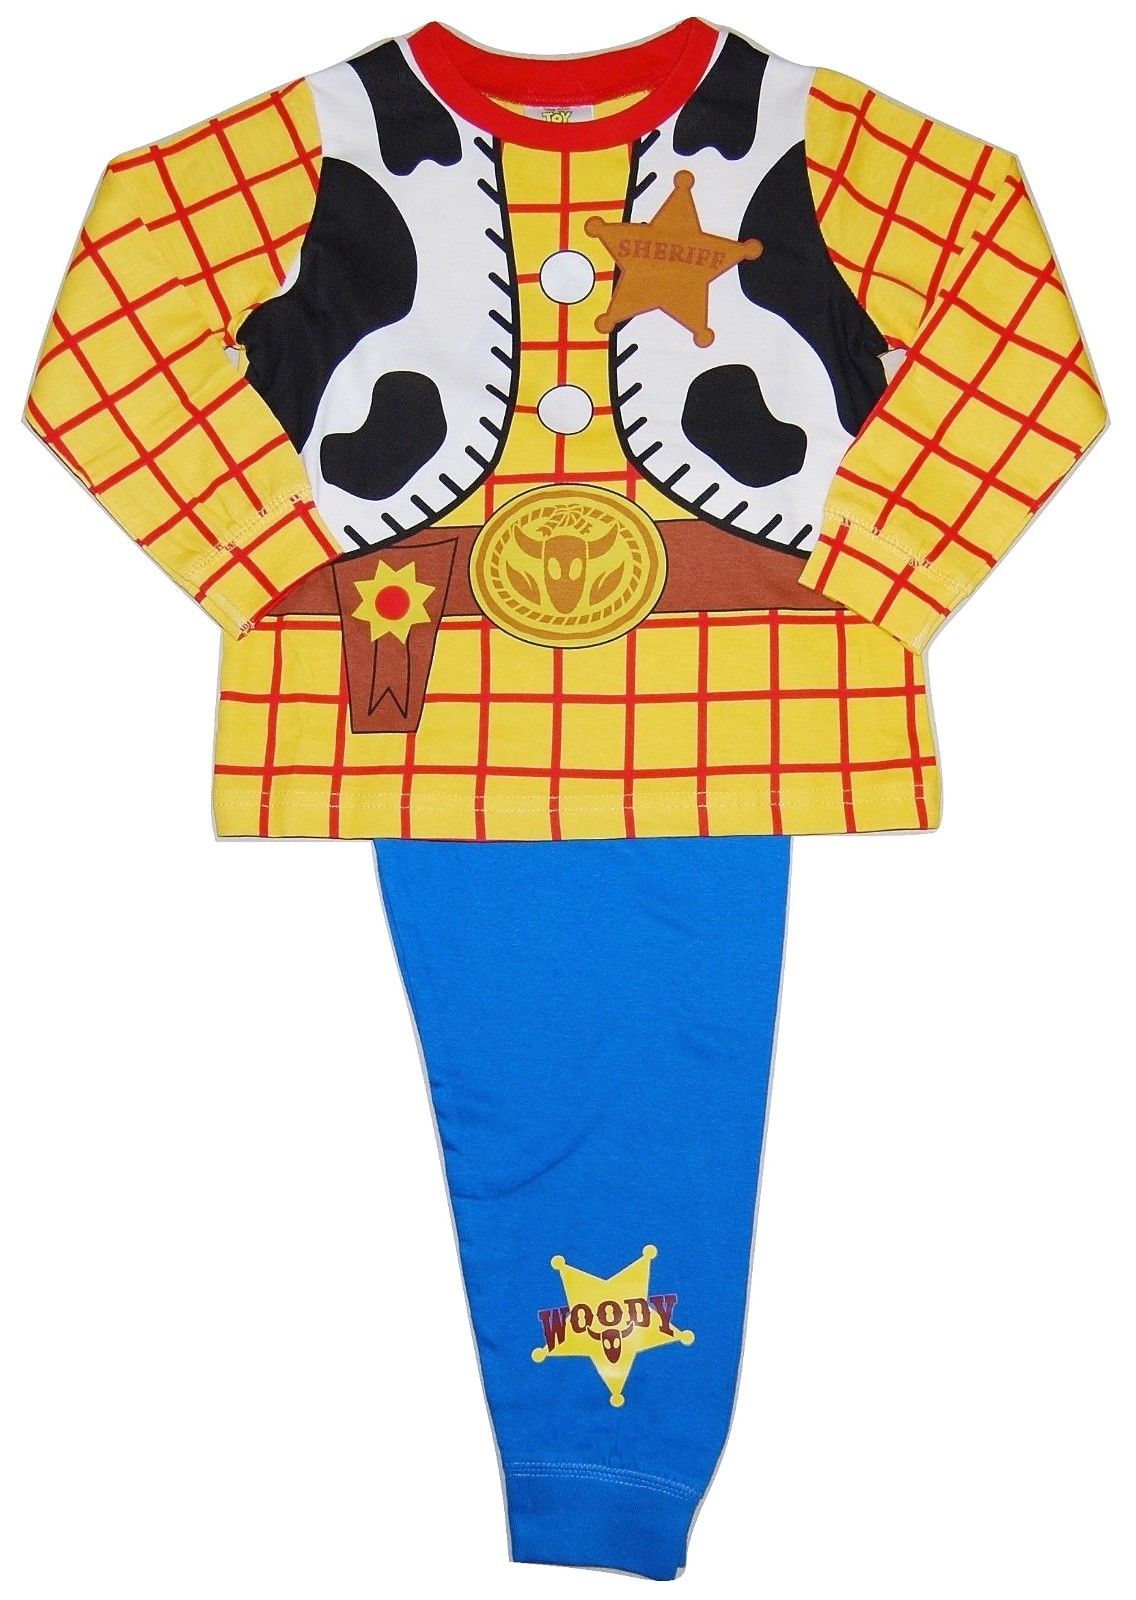 Boy's 'Woody' Costume Pyjamas, featuring Woody Shirt design on Top, and Woody logo on Bottoms.